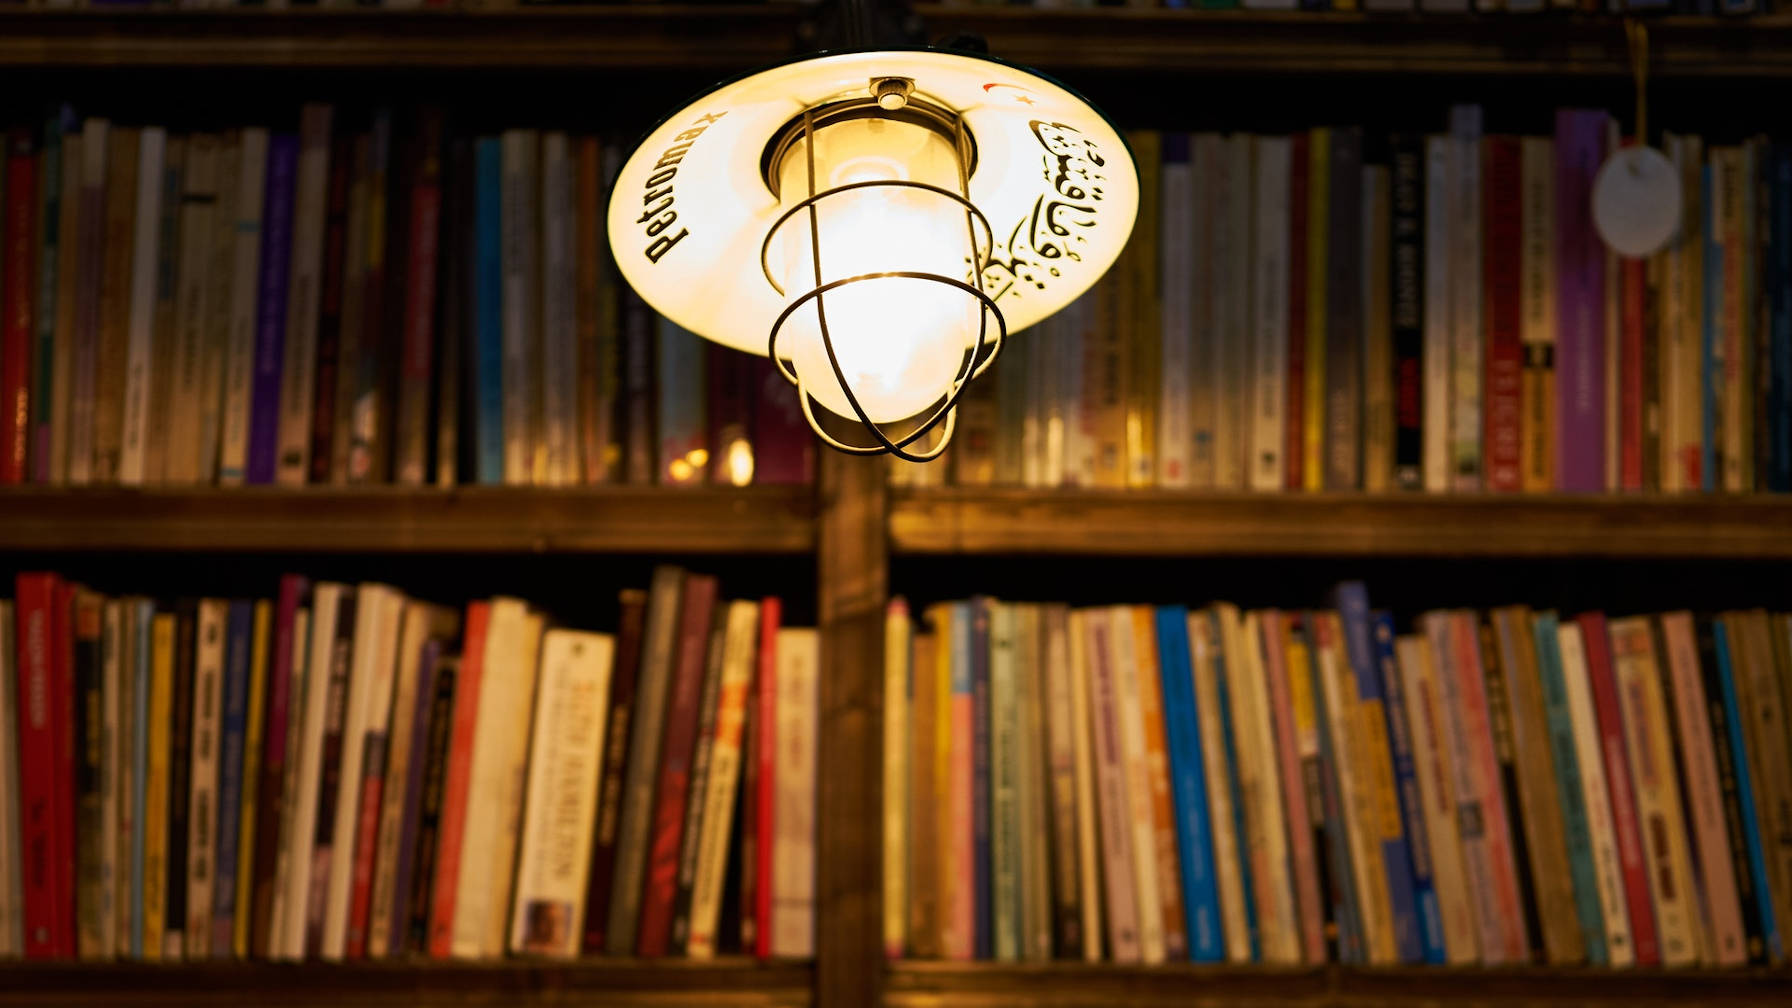 Shelves filled with books with a hanging light in front, illuminating them.